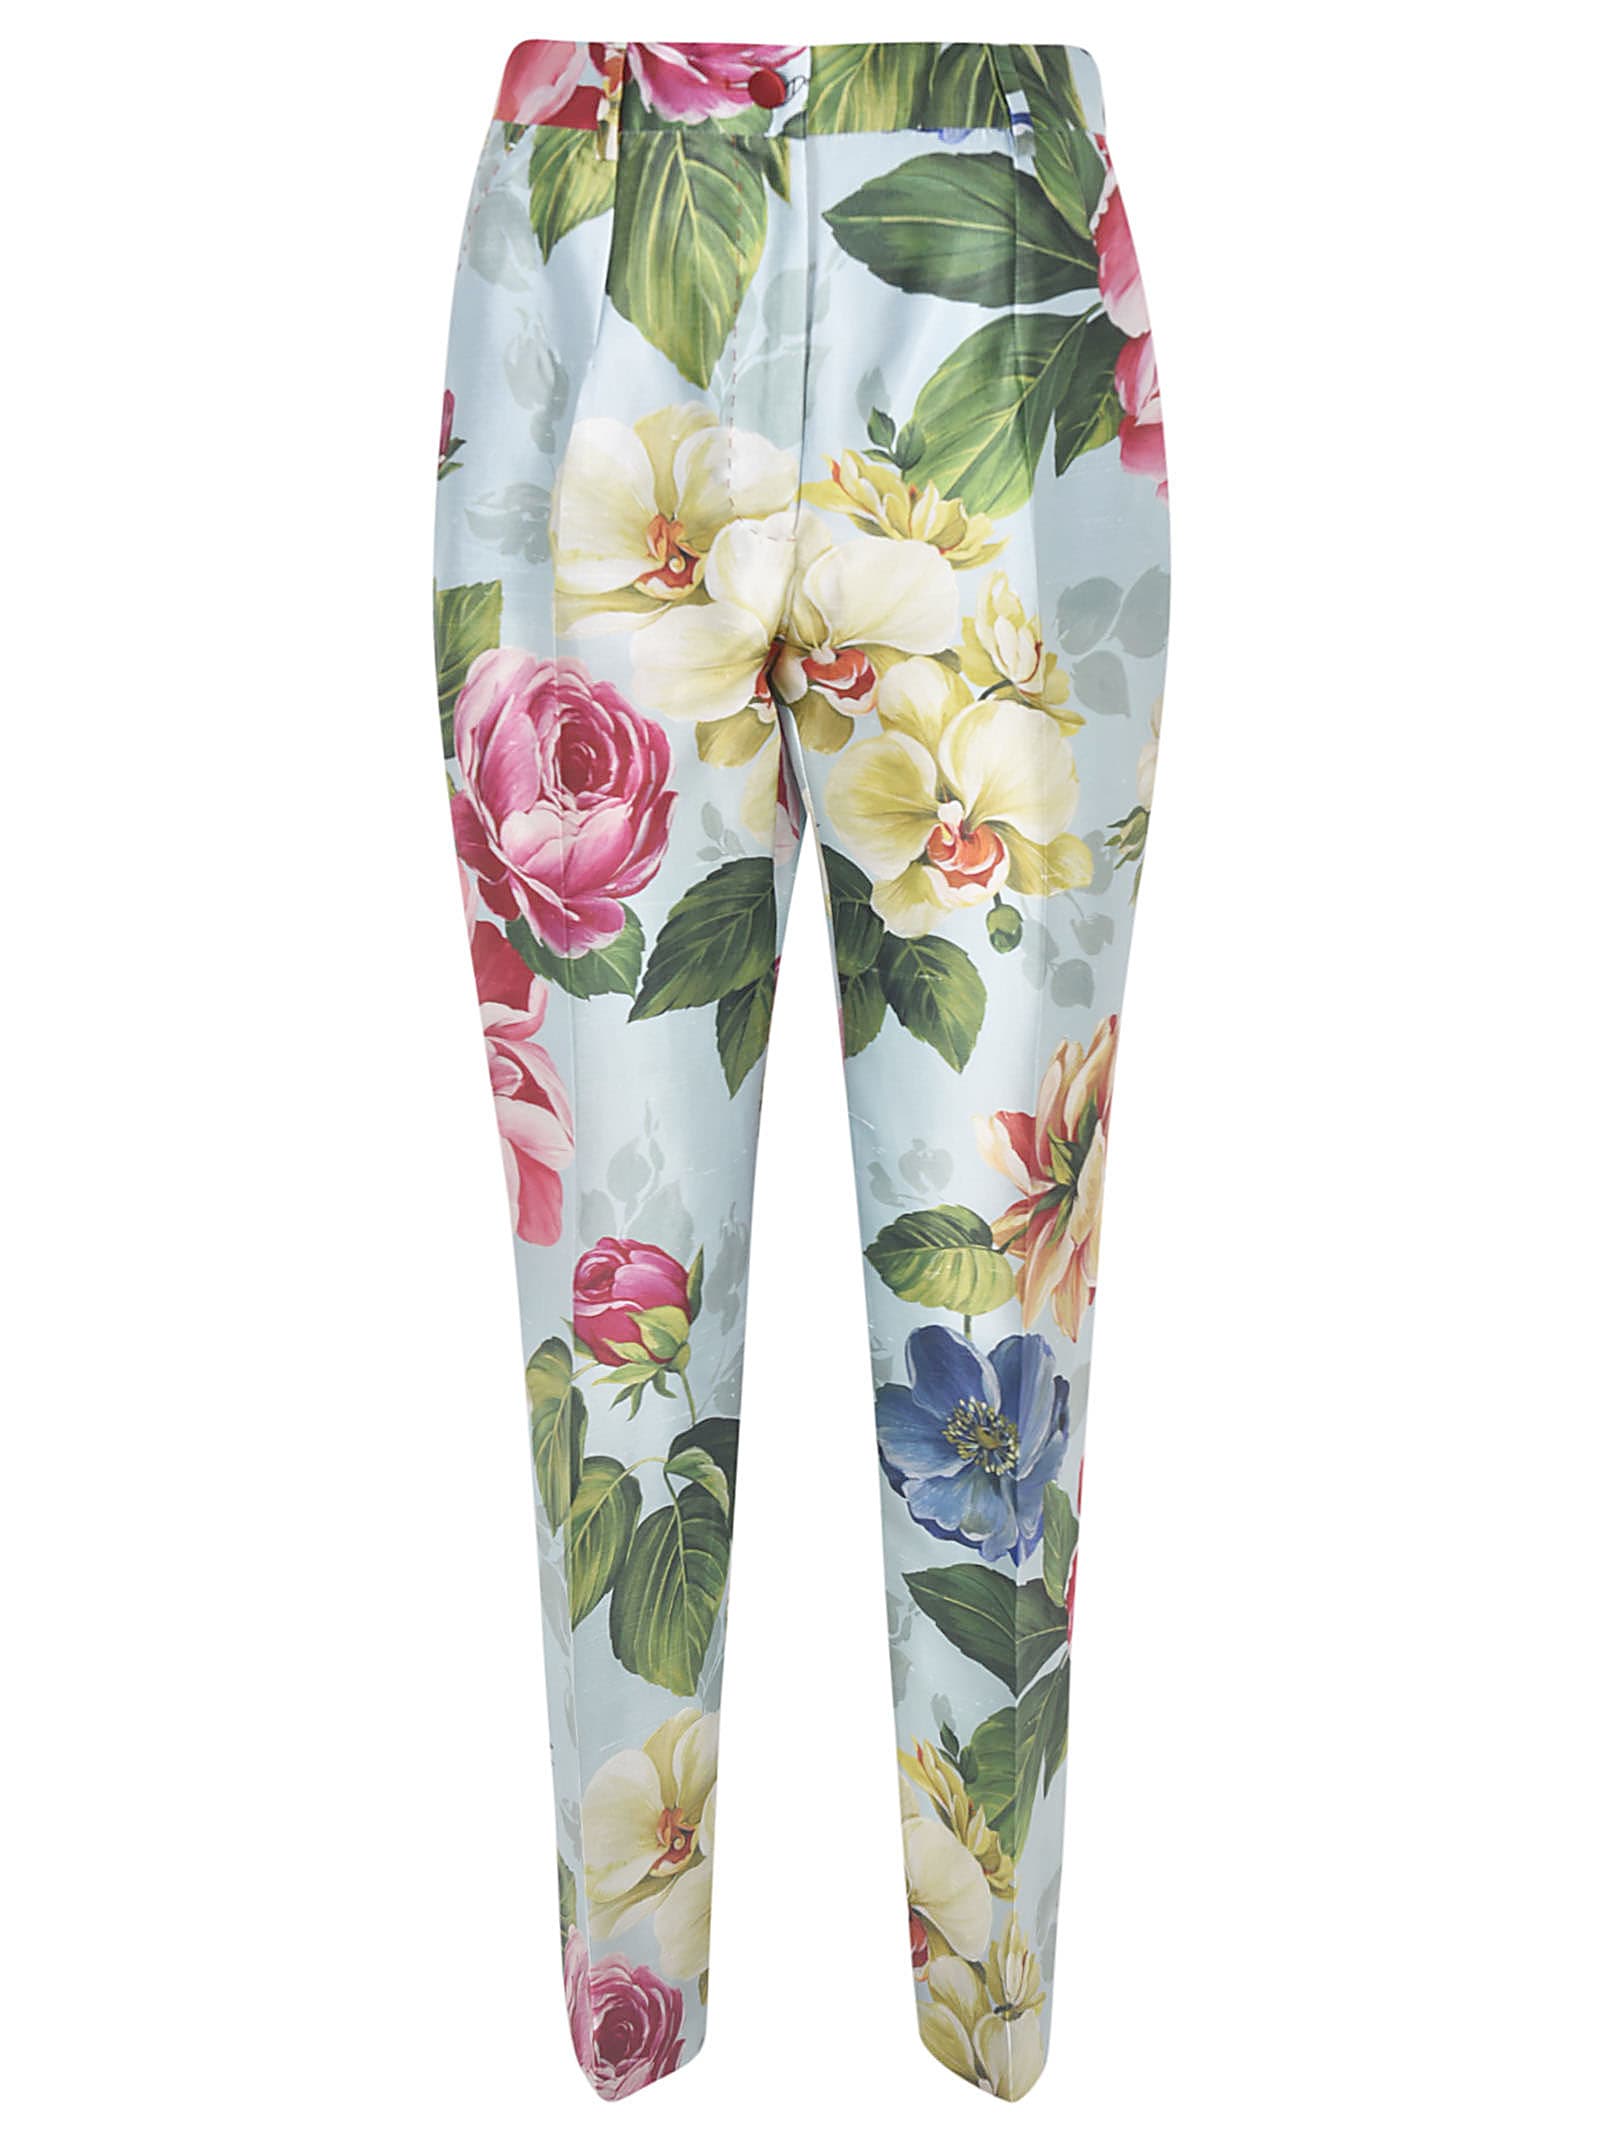 DOLCE & GABBANA FLORAL PRINTED TROUSERS,11249393